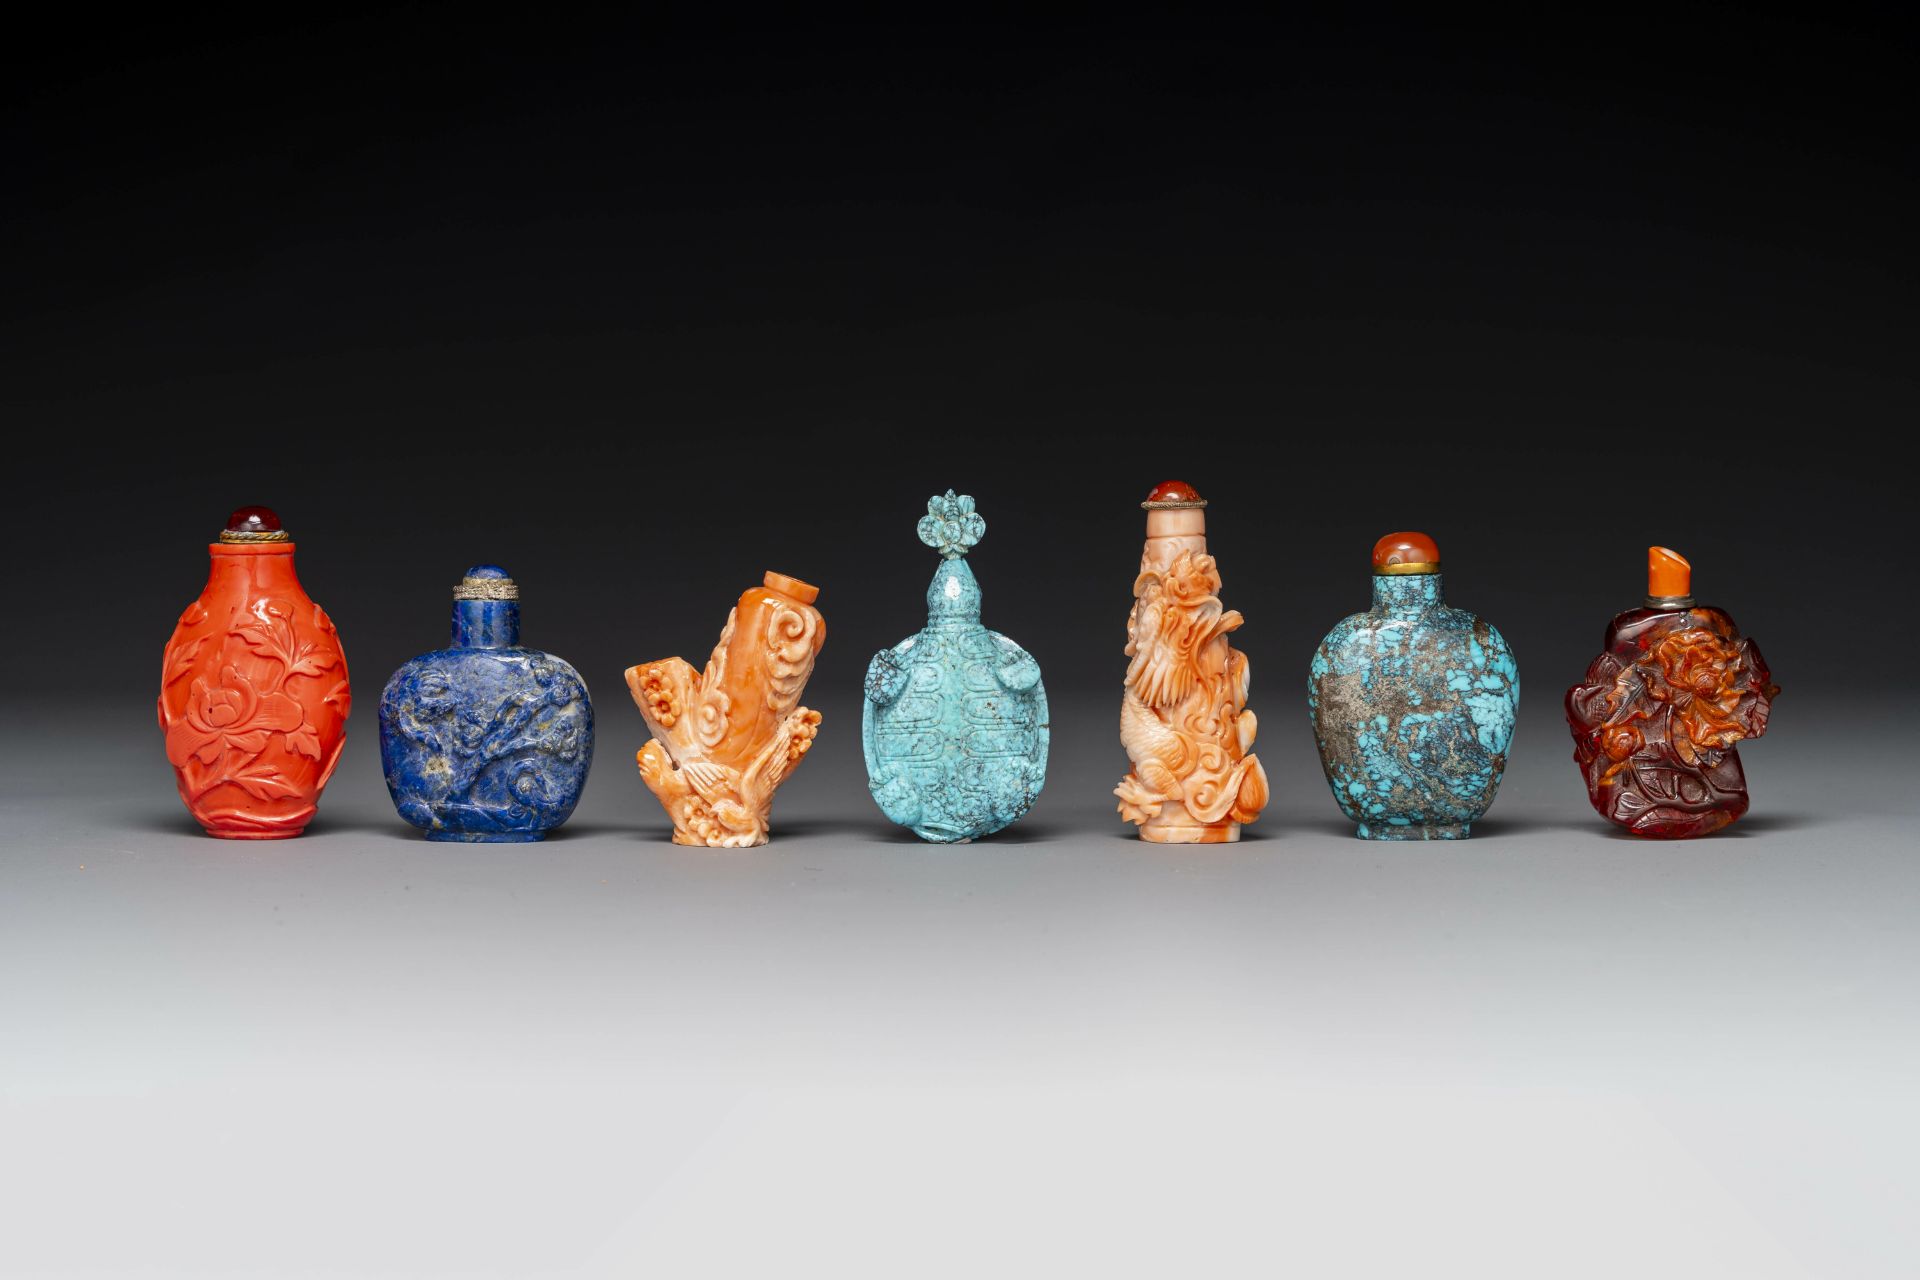 Seven varied Chinese snuff bottles of precious stone, red coral, glass and amber, 19th C. - Image 3 of 7